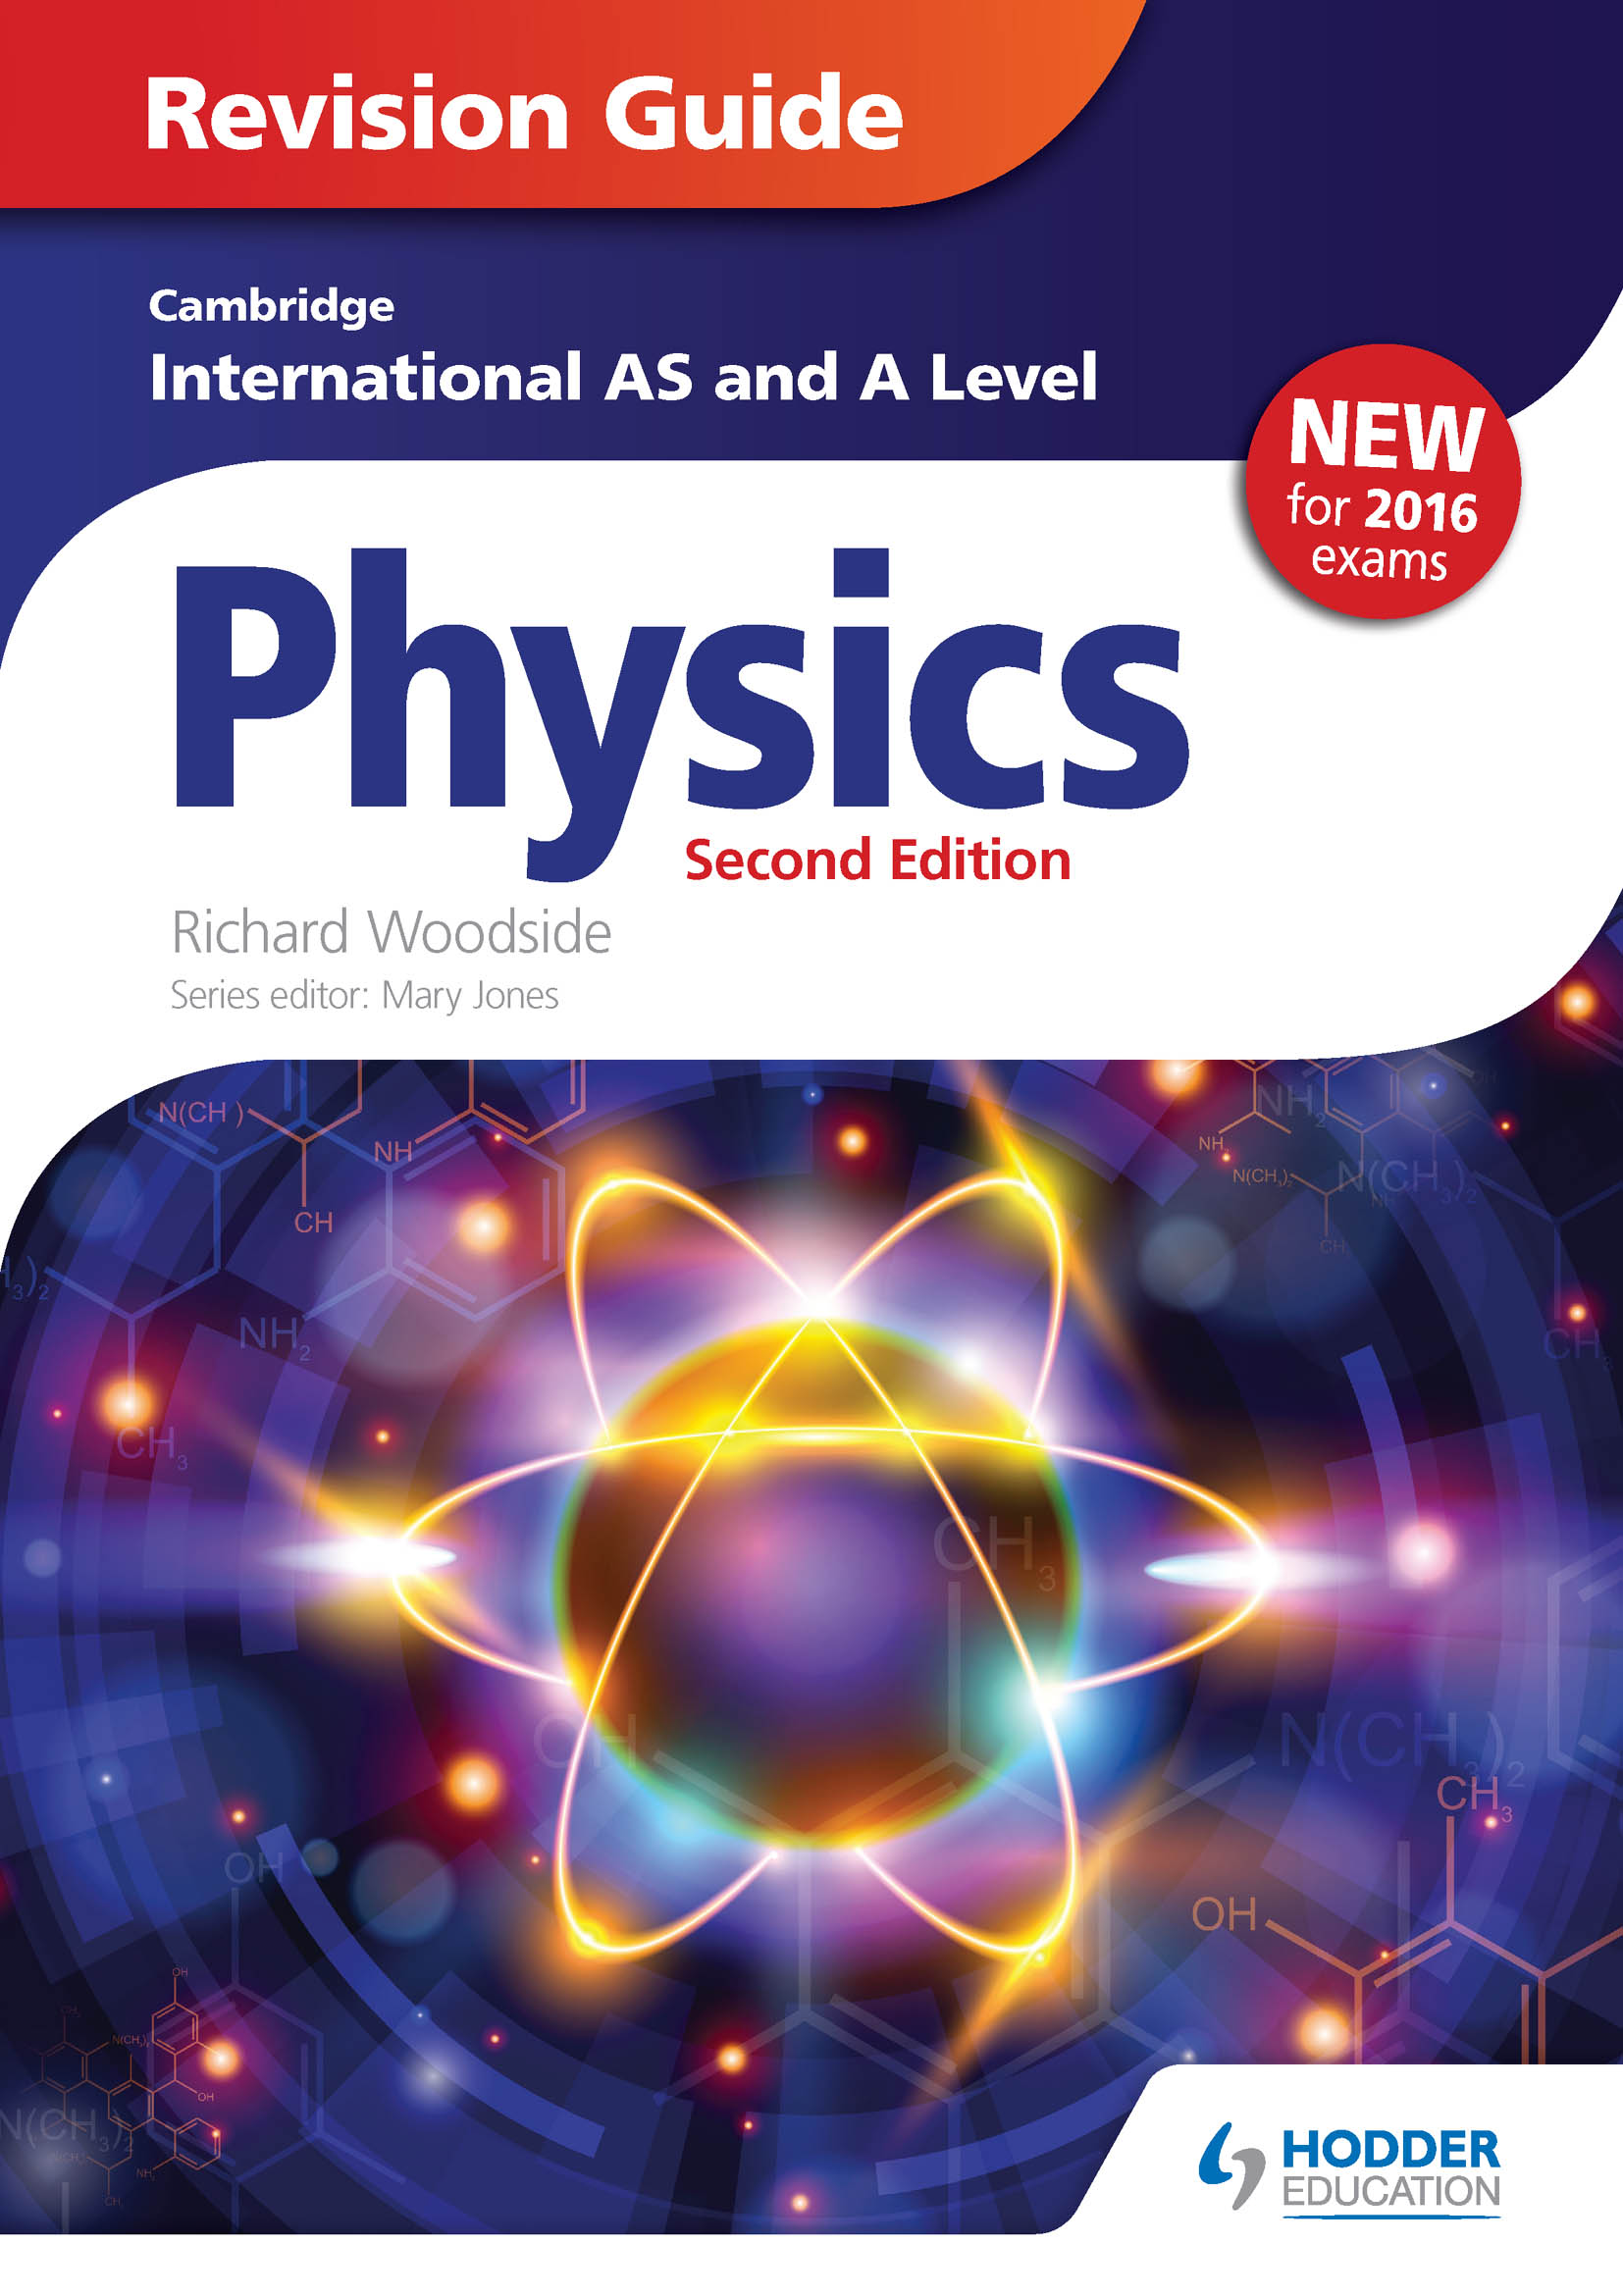 [PDF] Ebook Hodder Cambridge International AS & A Level Physics Revision Guide 2nd Edition